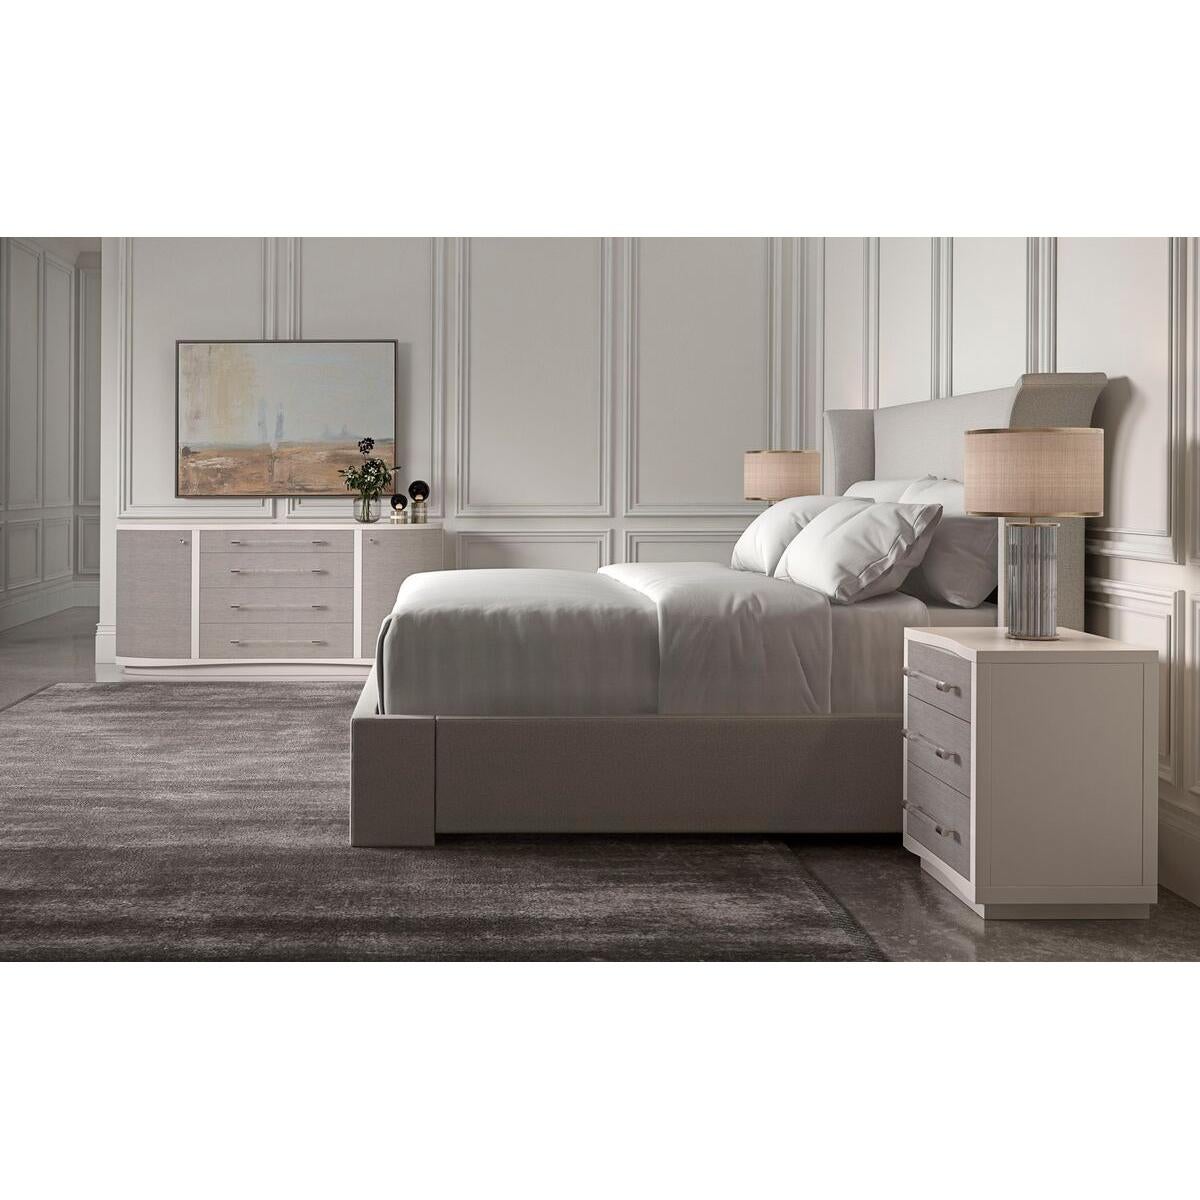 An elegant US king-sized upholstered bed frame featuring a high headboard that is flared out and curves gently at the sides. The frame is wrapped in a light natural color fabric with a subtle textured finish, which suggests a contemporary design